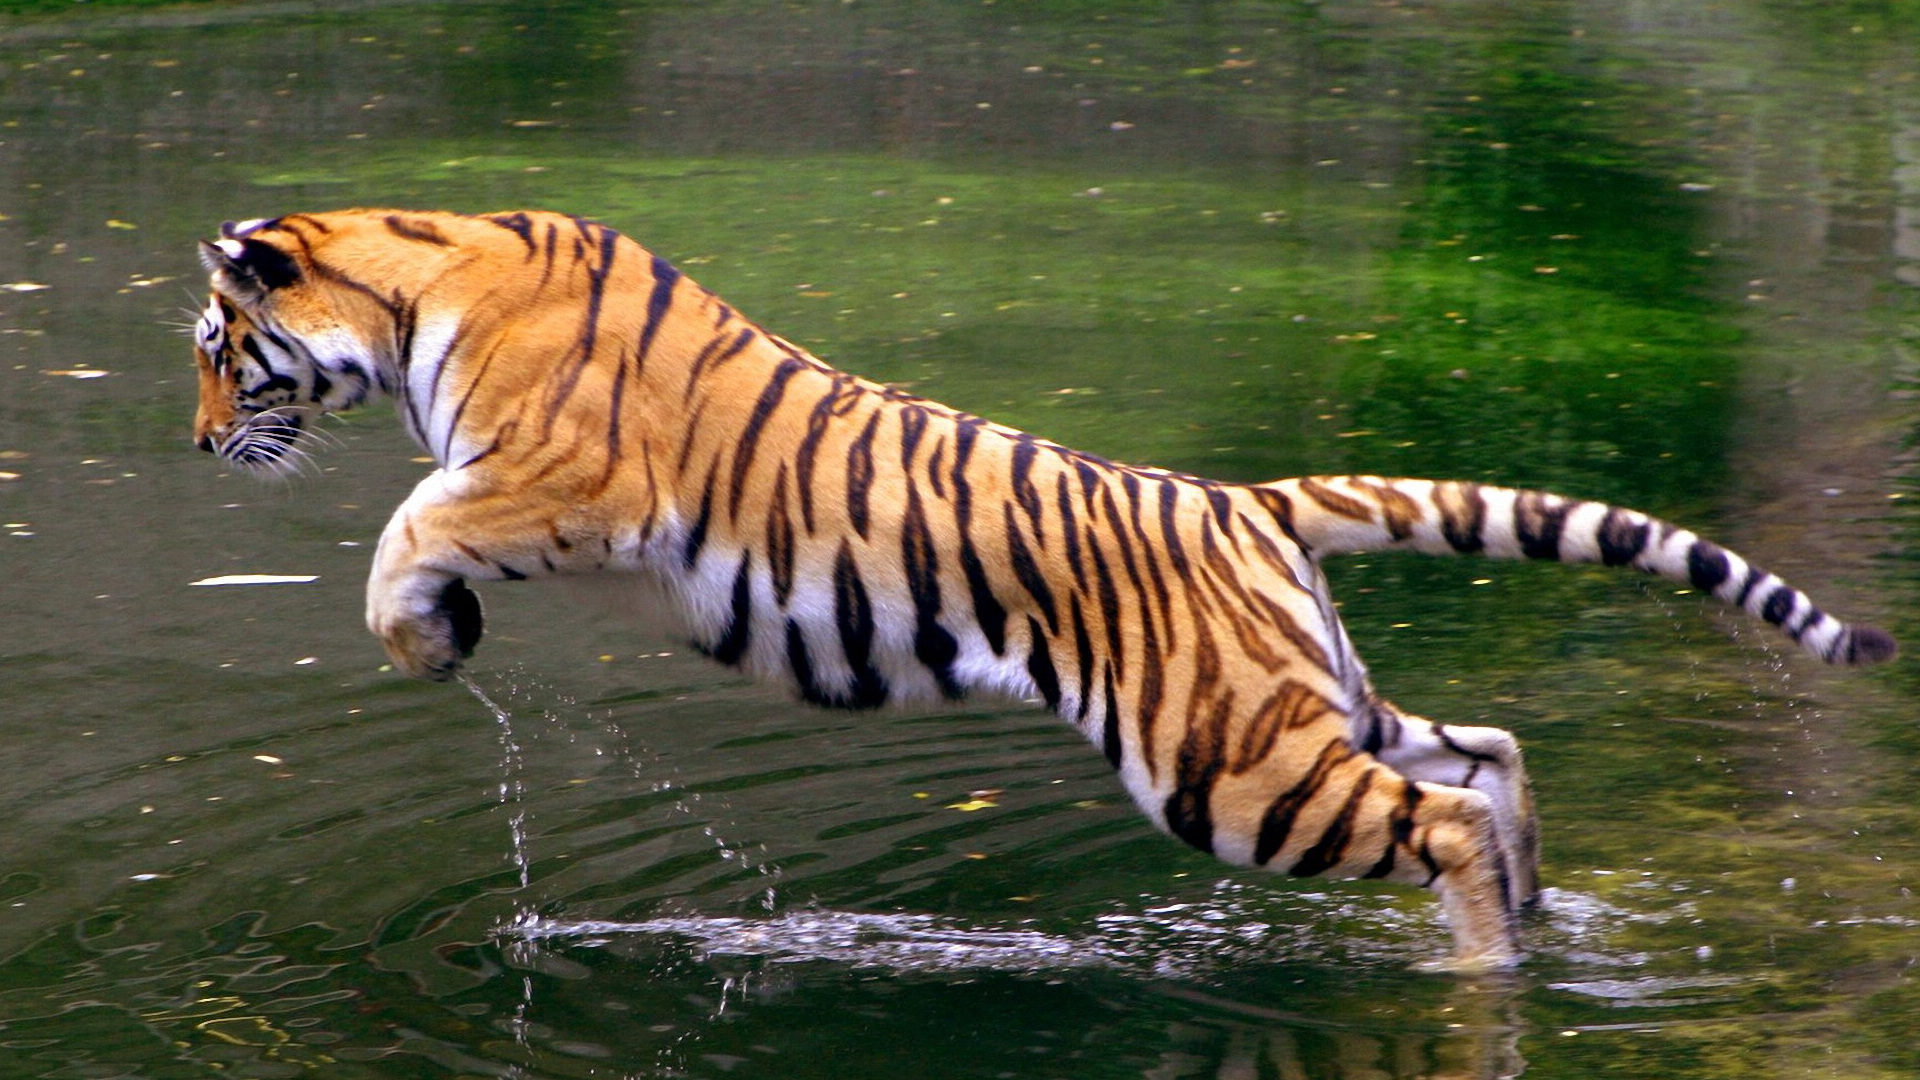 Tiger Hd Photos Mobile Compatible - Indian Tiger Image Hd , HD Wallpaper & Backgrounds